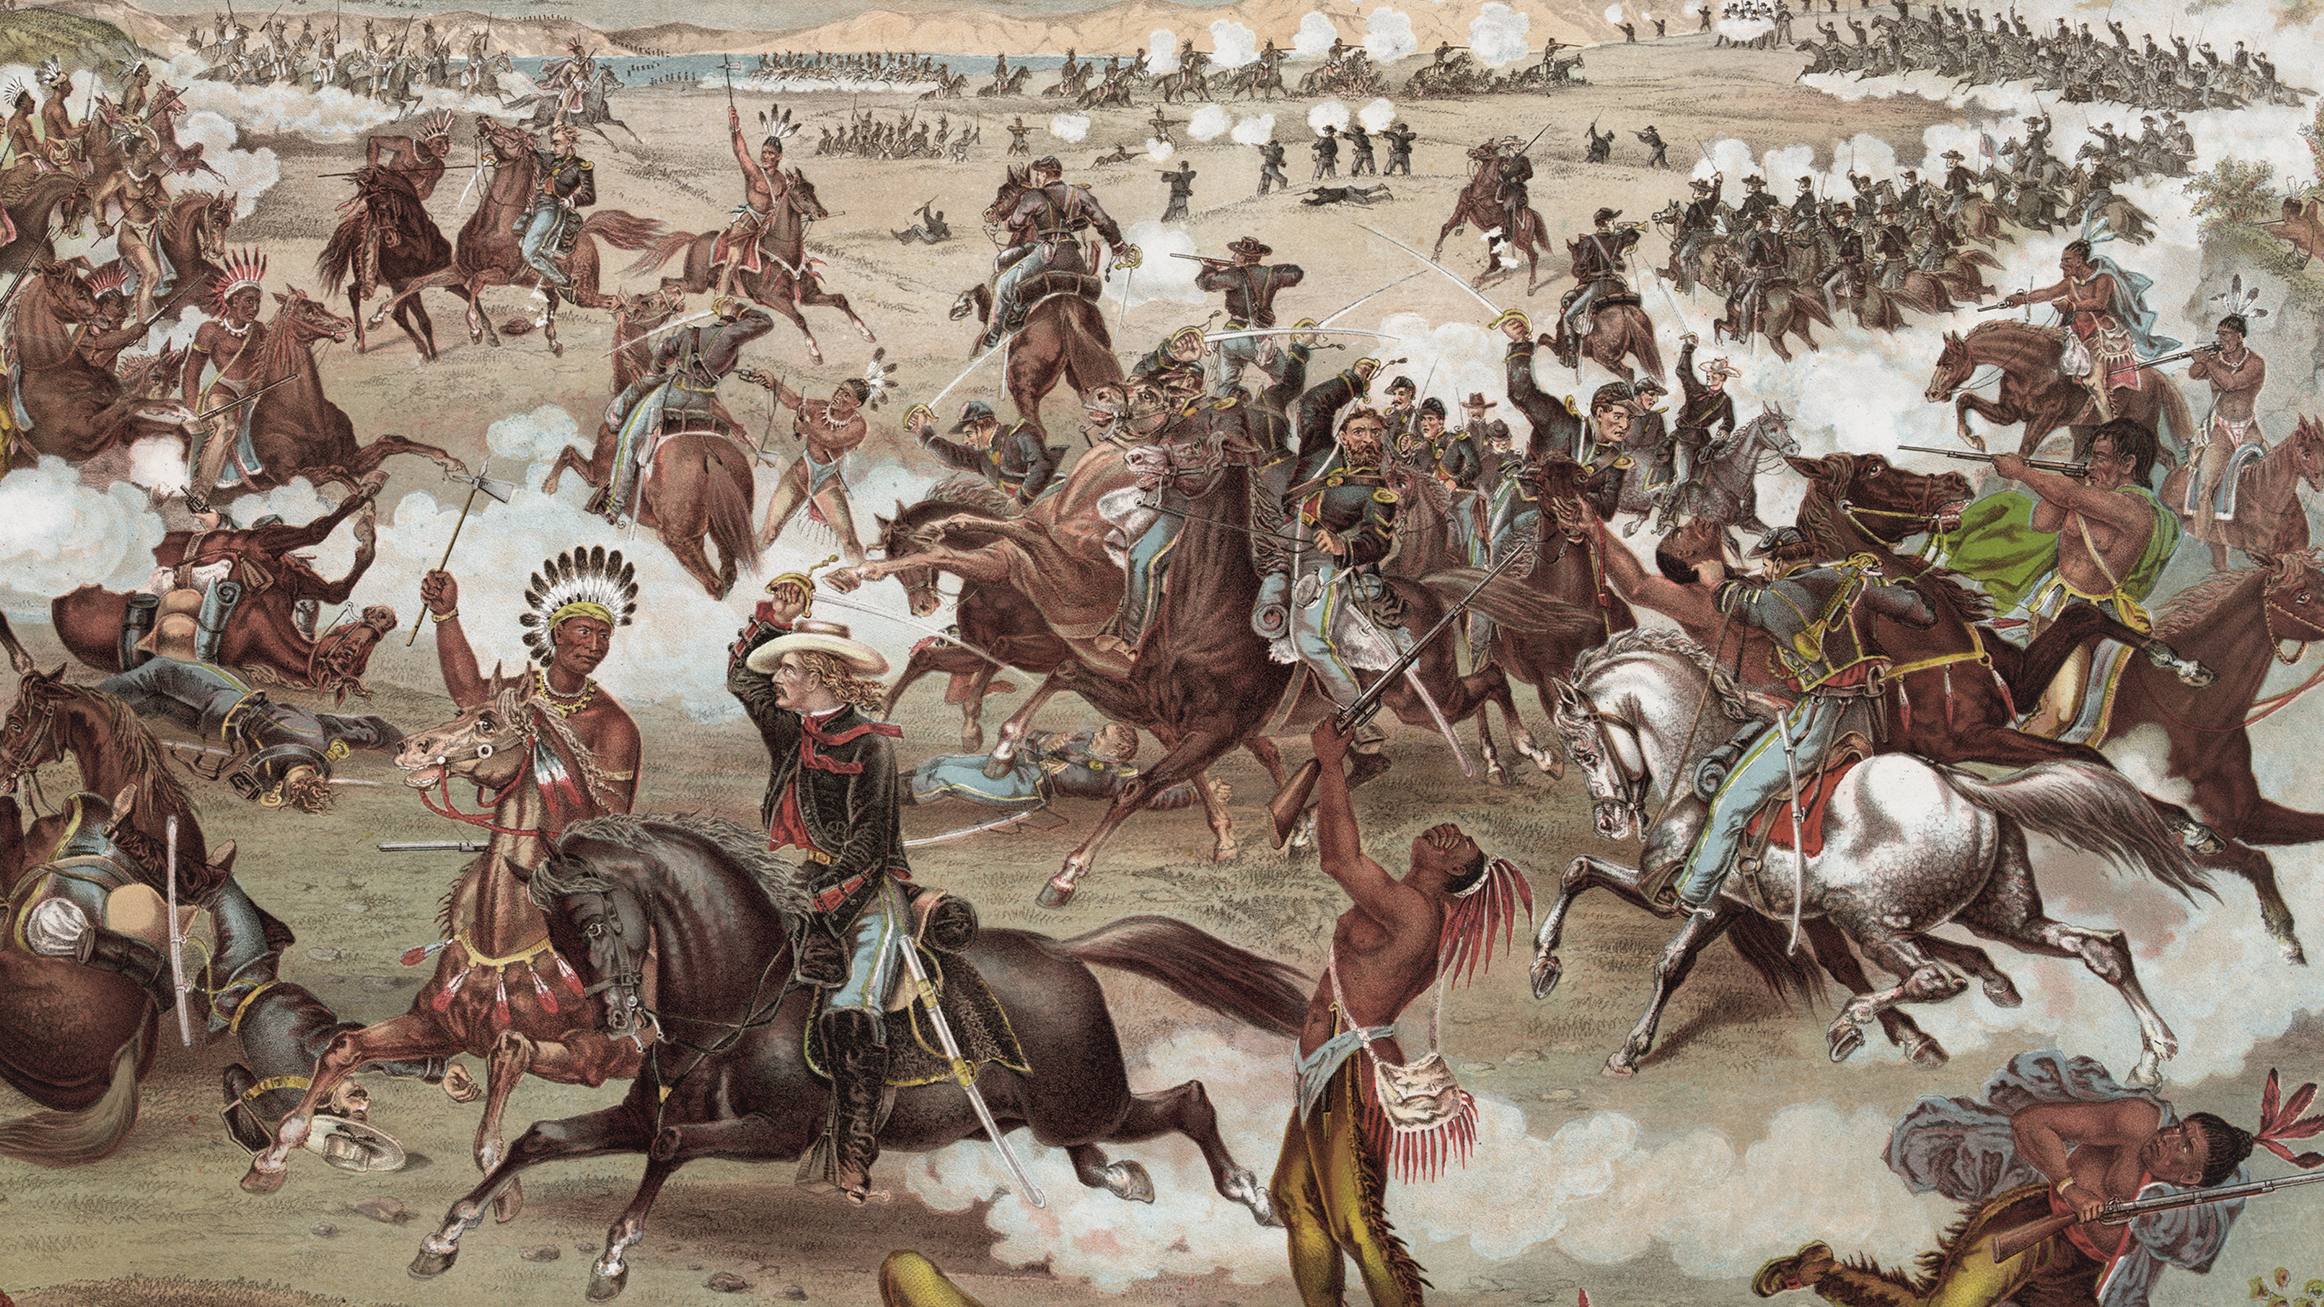 What Really Happened at the Battle of the Little Bighorn? - HISTORY